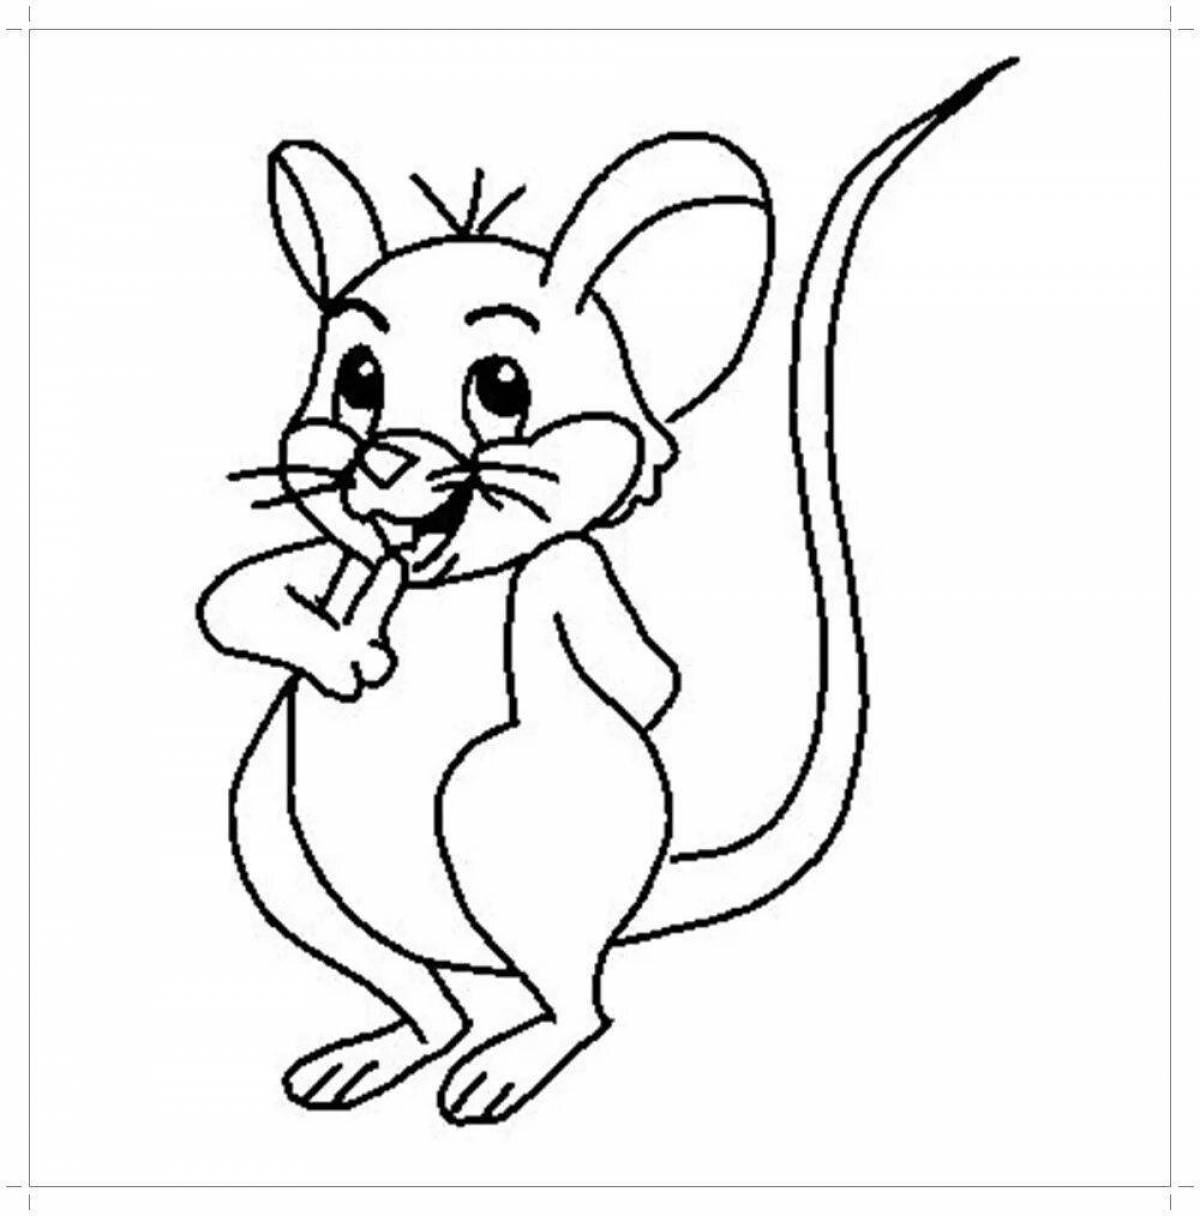 Sweet mouse drawing